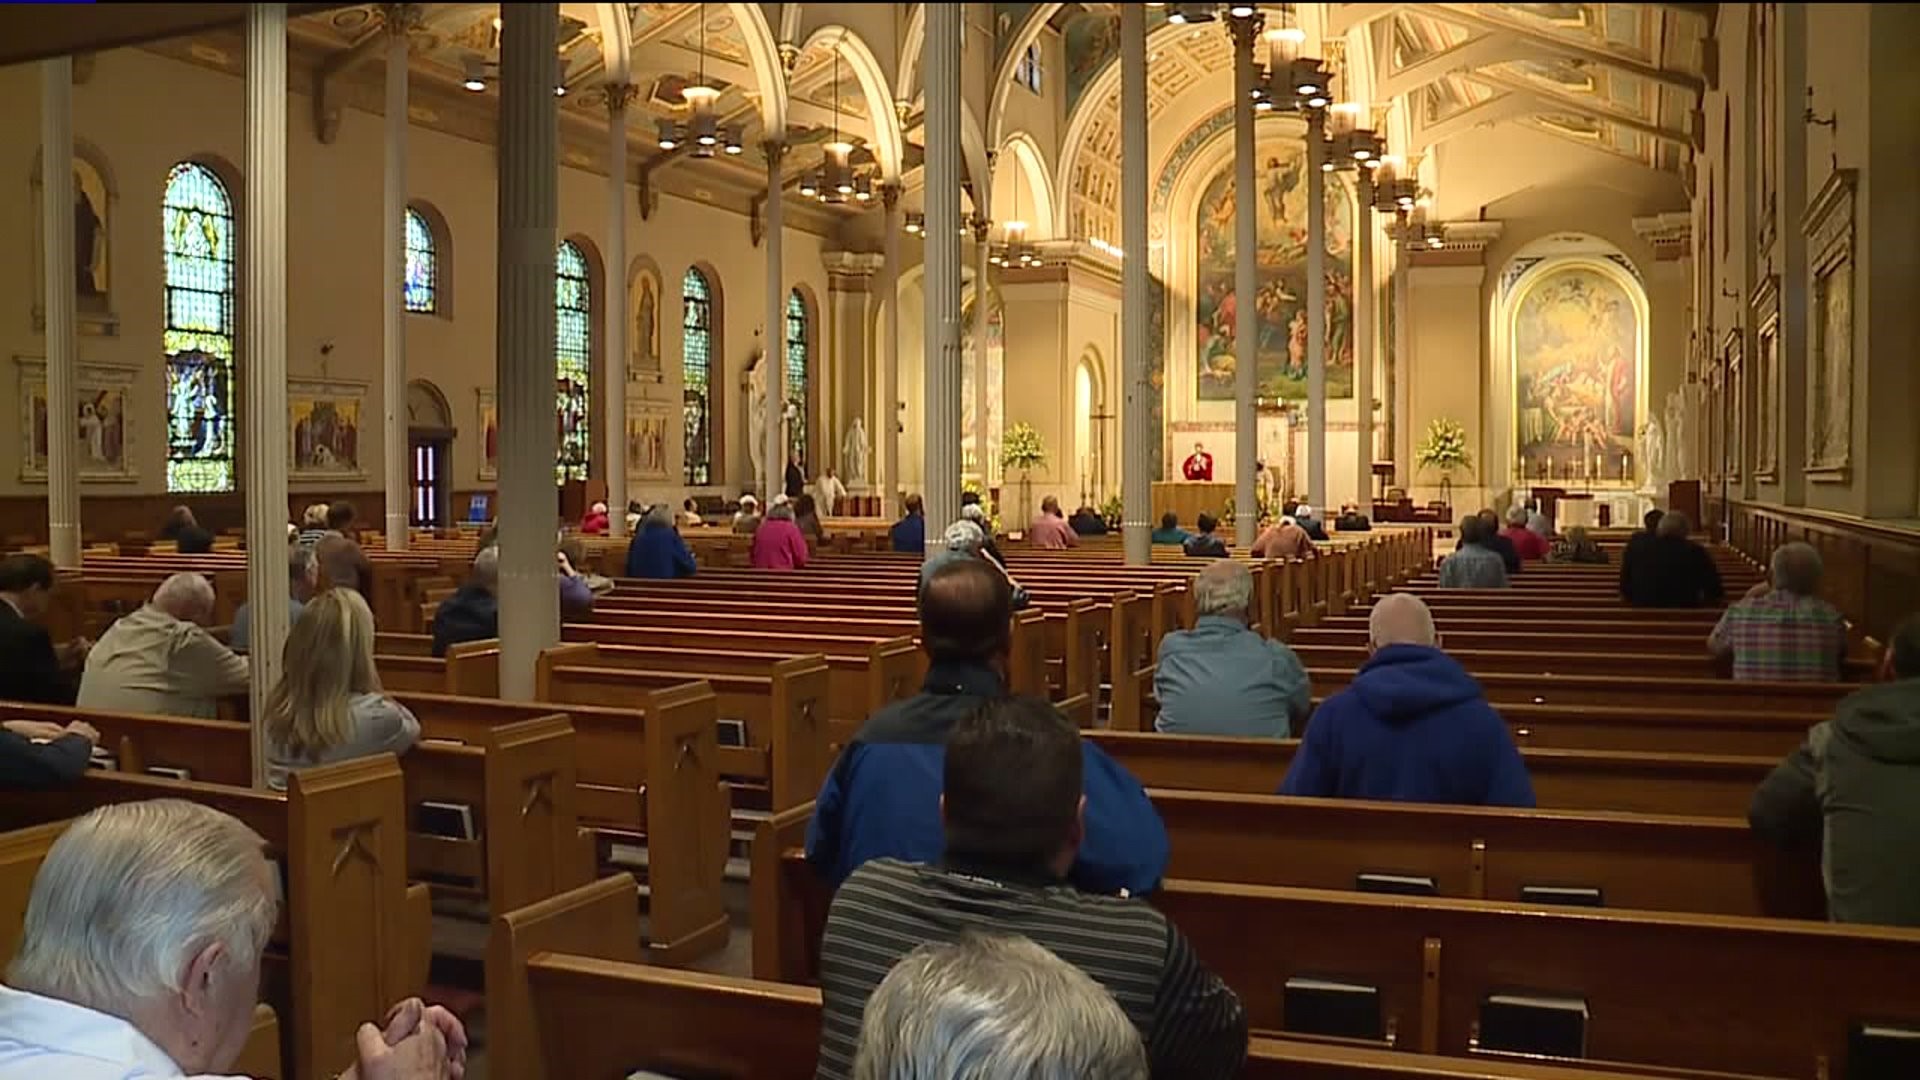 St. Peter's Cathedral Now Closed for Renovations, Last Mass Held Until Fall